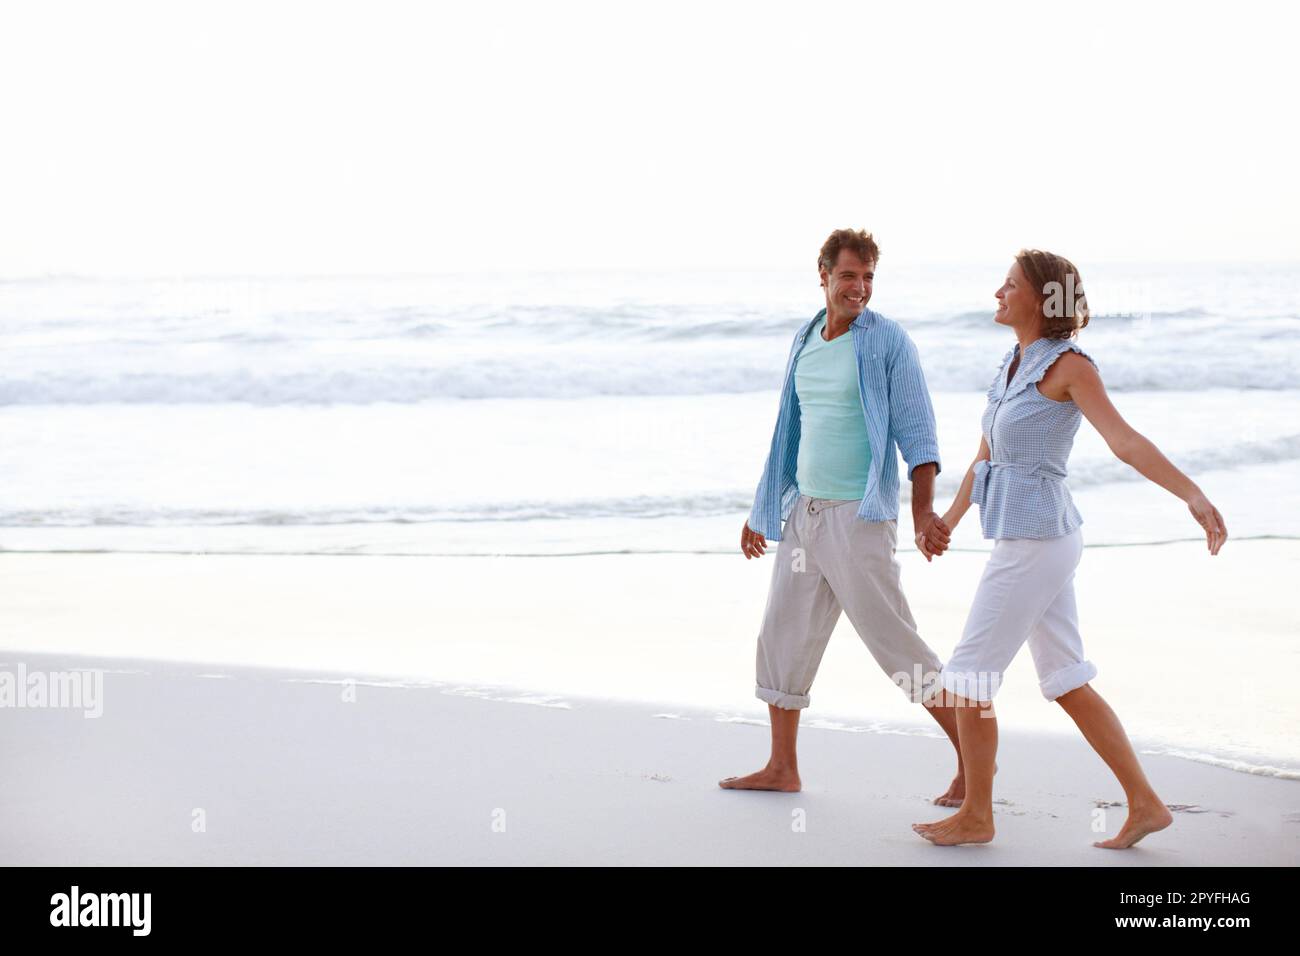 Walking through life together - True Love. A happy couple walking hand in hand on the beach together. Stock Photo